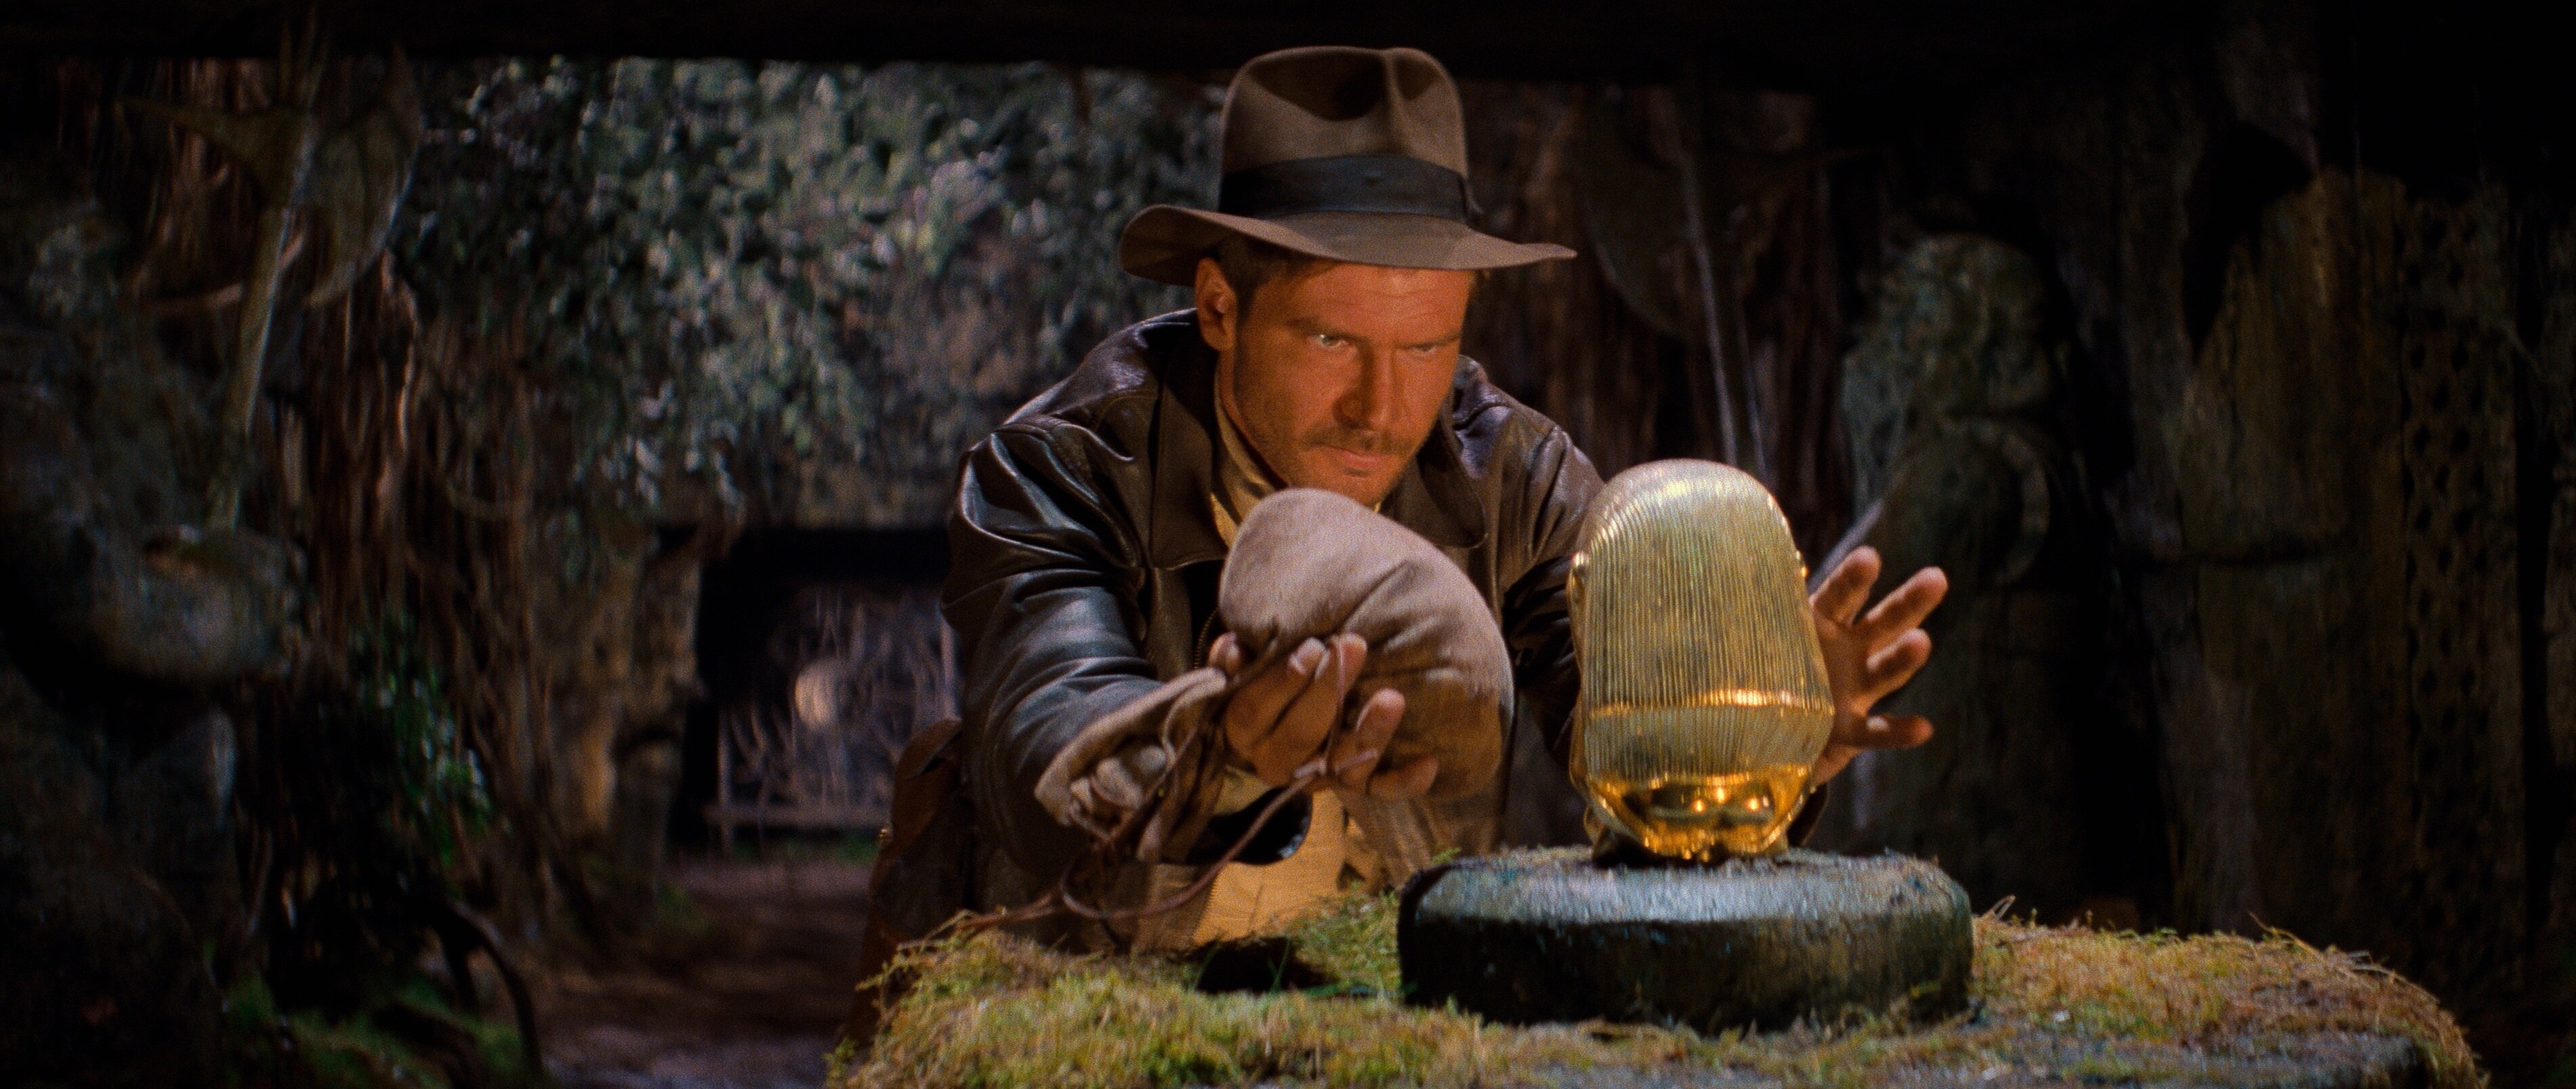 Indiana Jones Disney Plus Series In The Works May Already Be Canceled